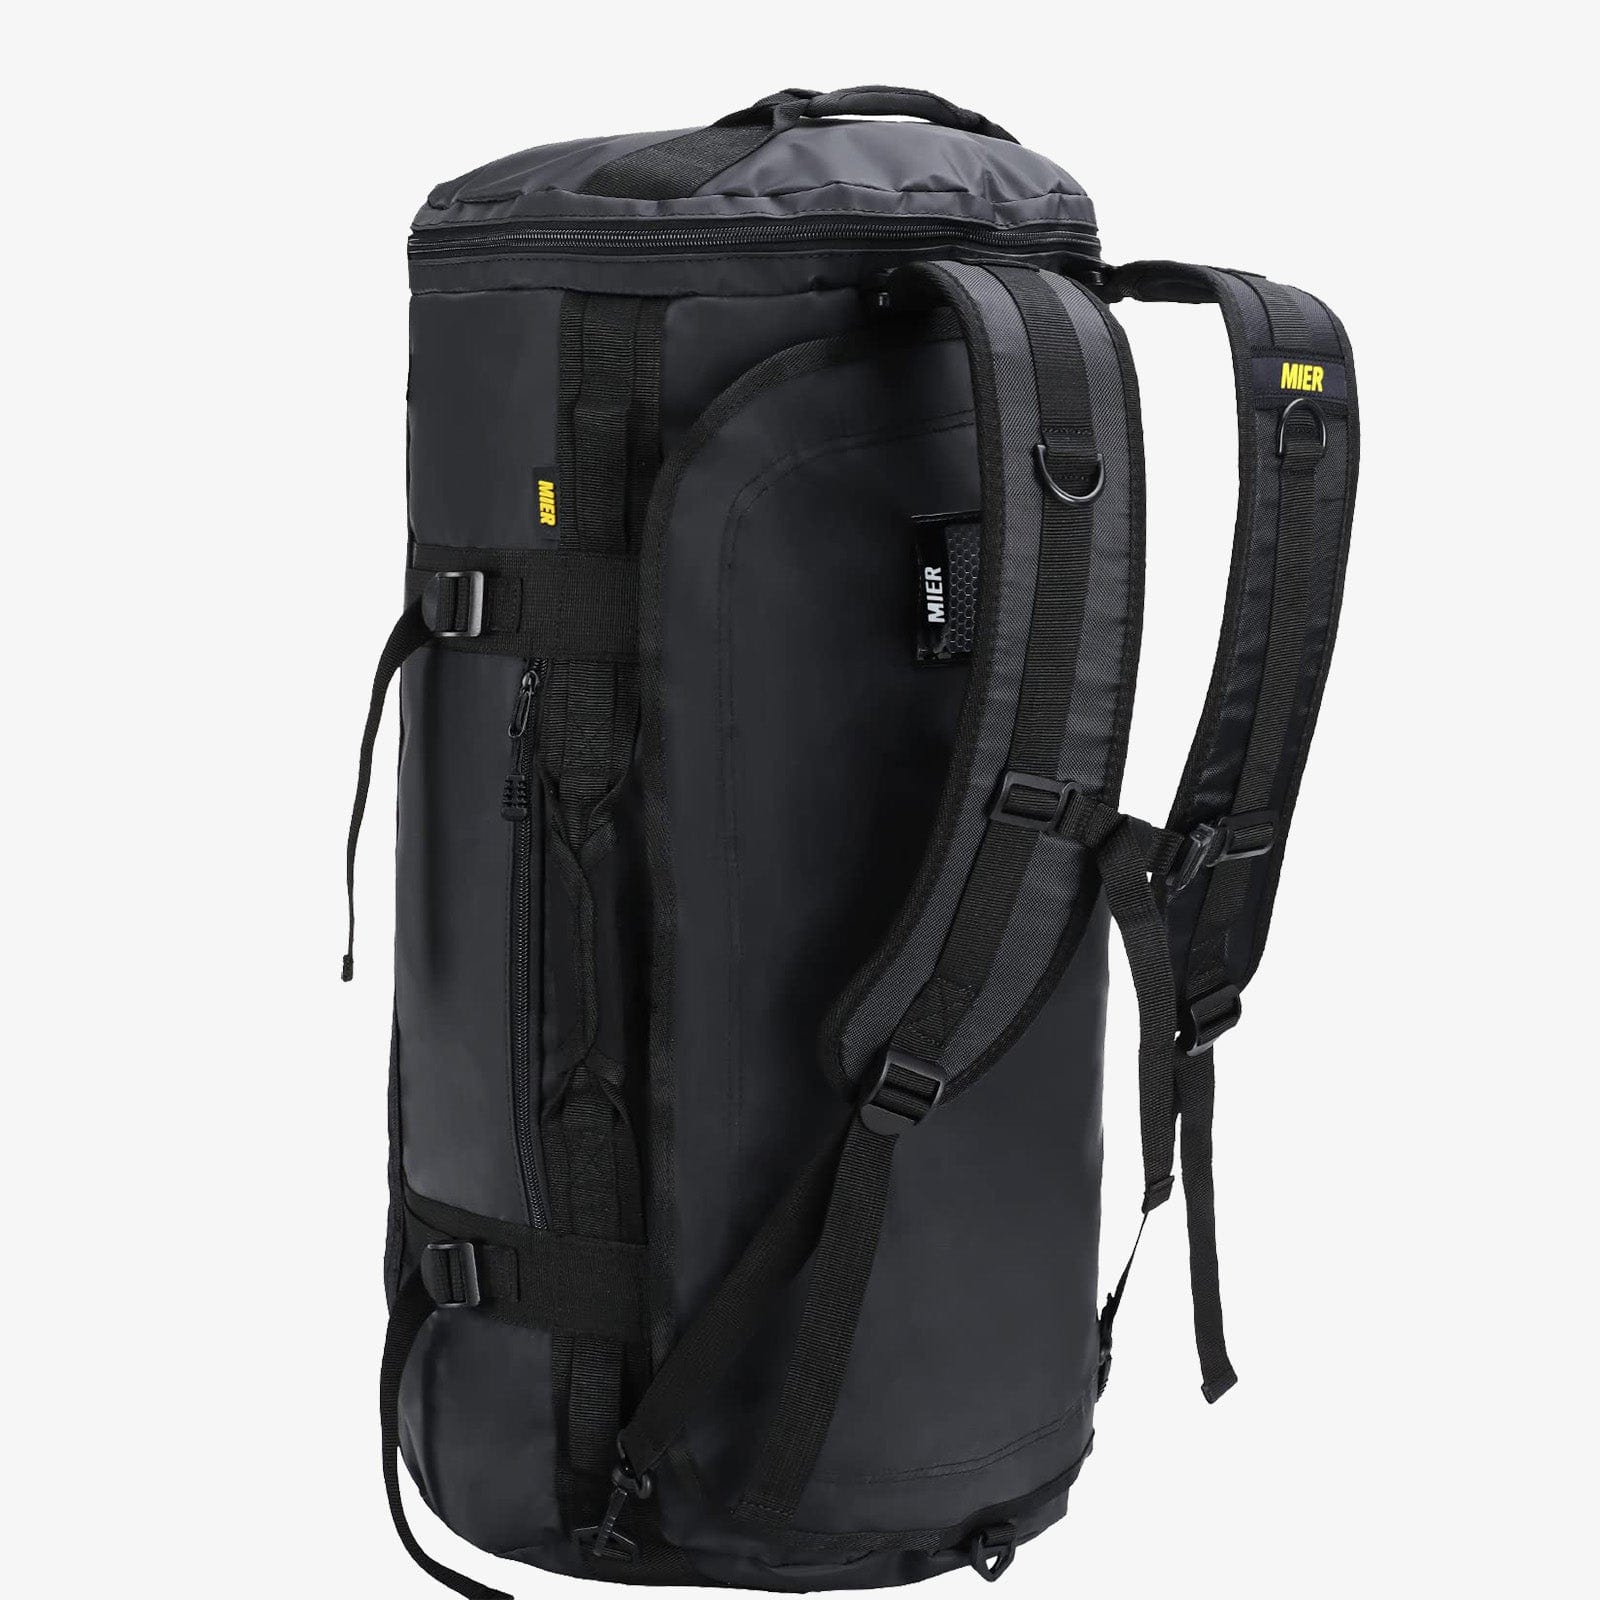 http://www.miersports.com/cdn/shop/products/large-duffel-backpack-sports-gym-bag-with-shoe-compartment-black-45l-mier-30242058797190.jpg?v=1660112179